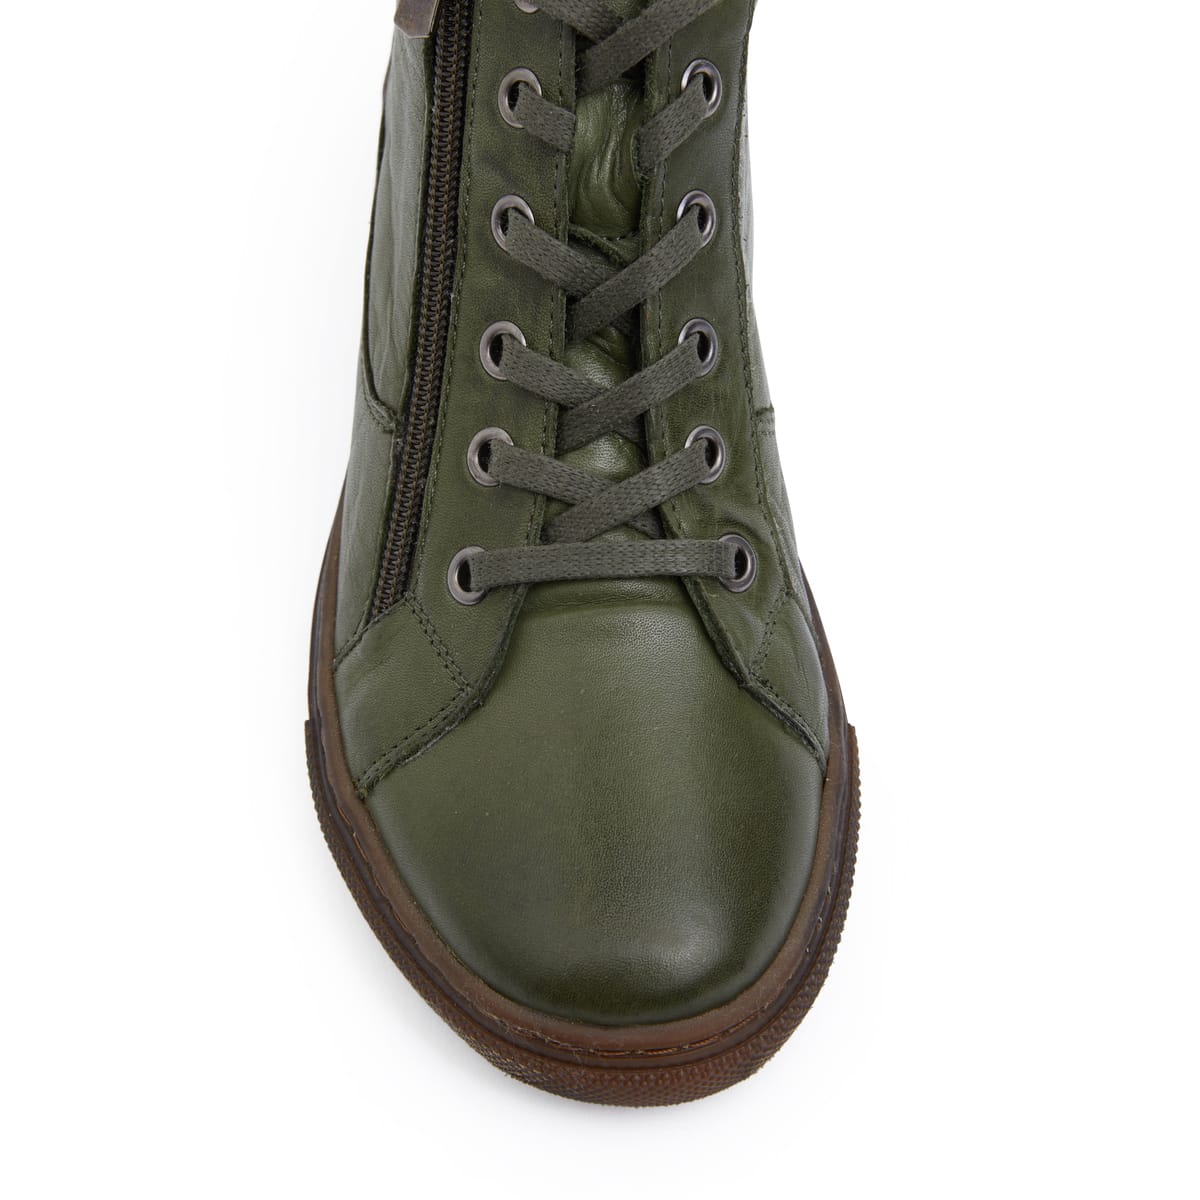 Wagner Boot in Khaki Leather